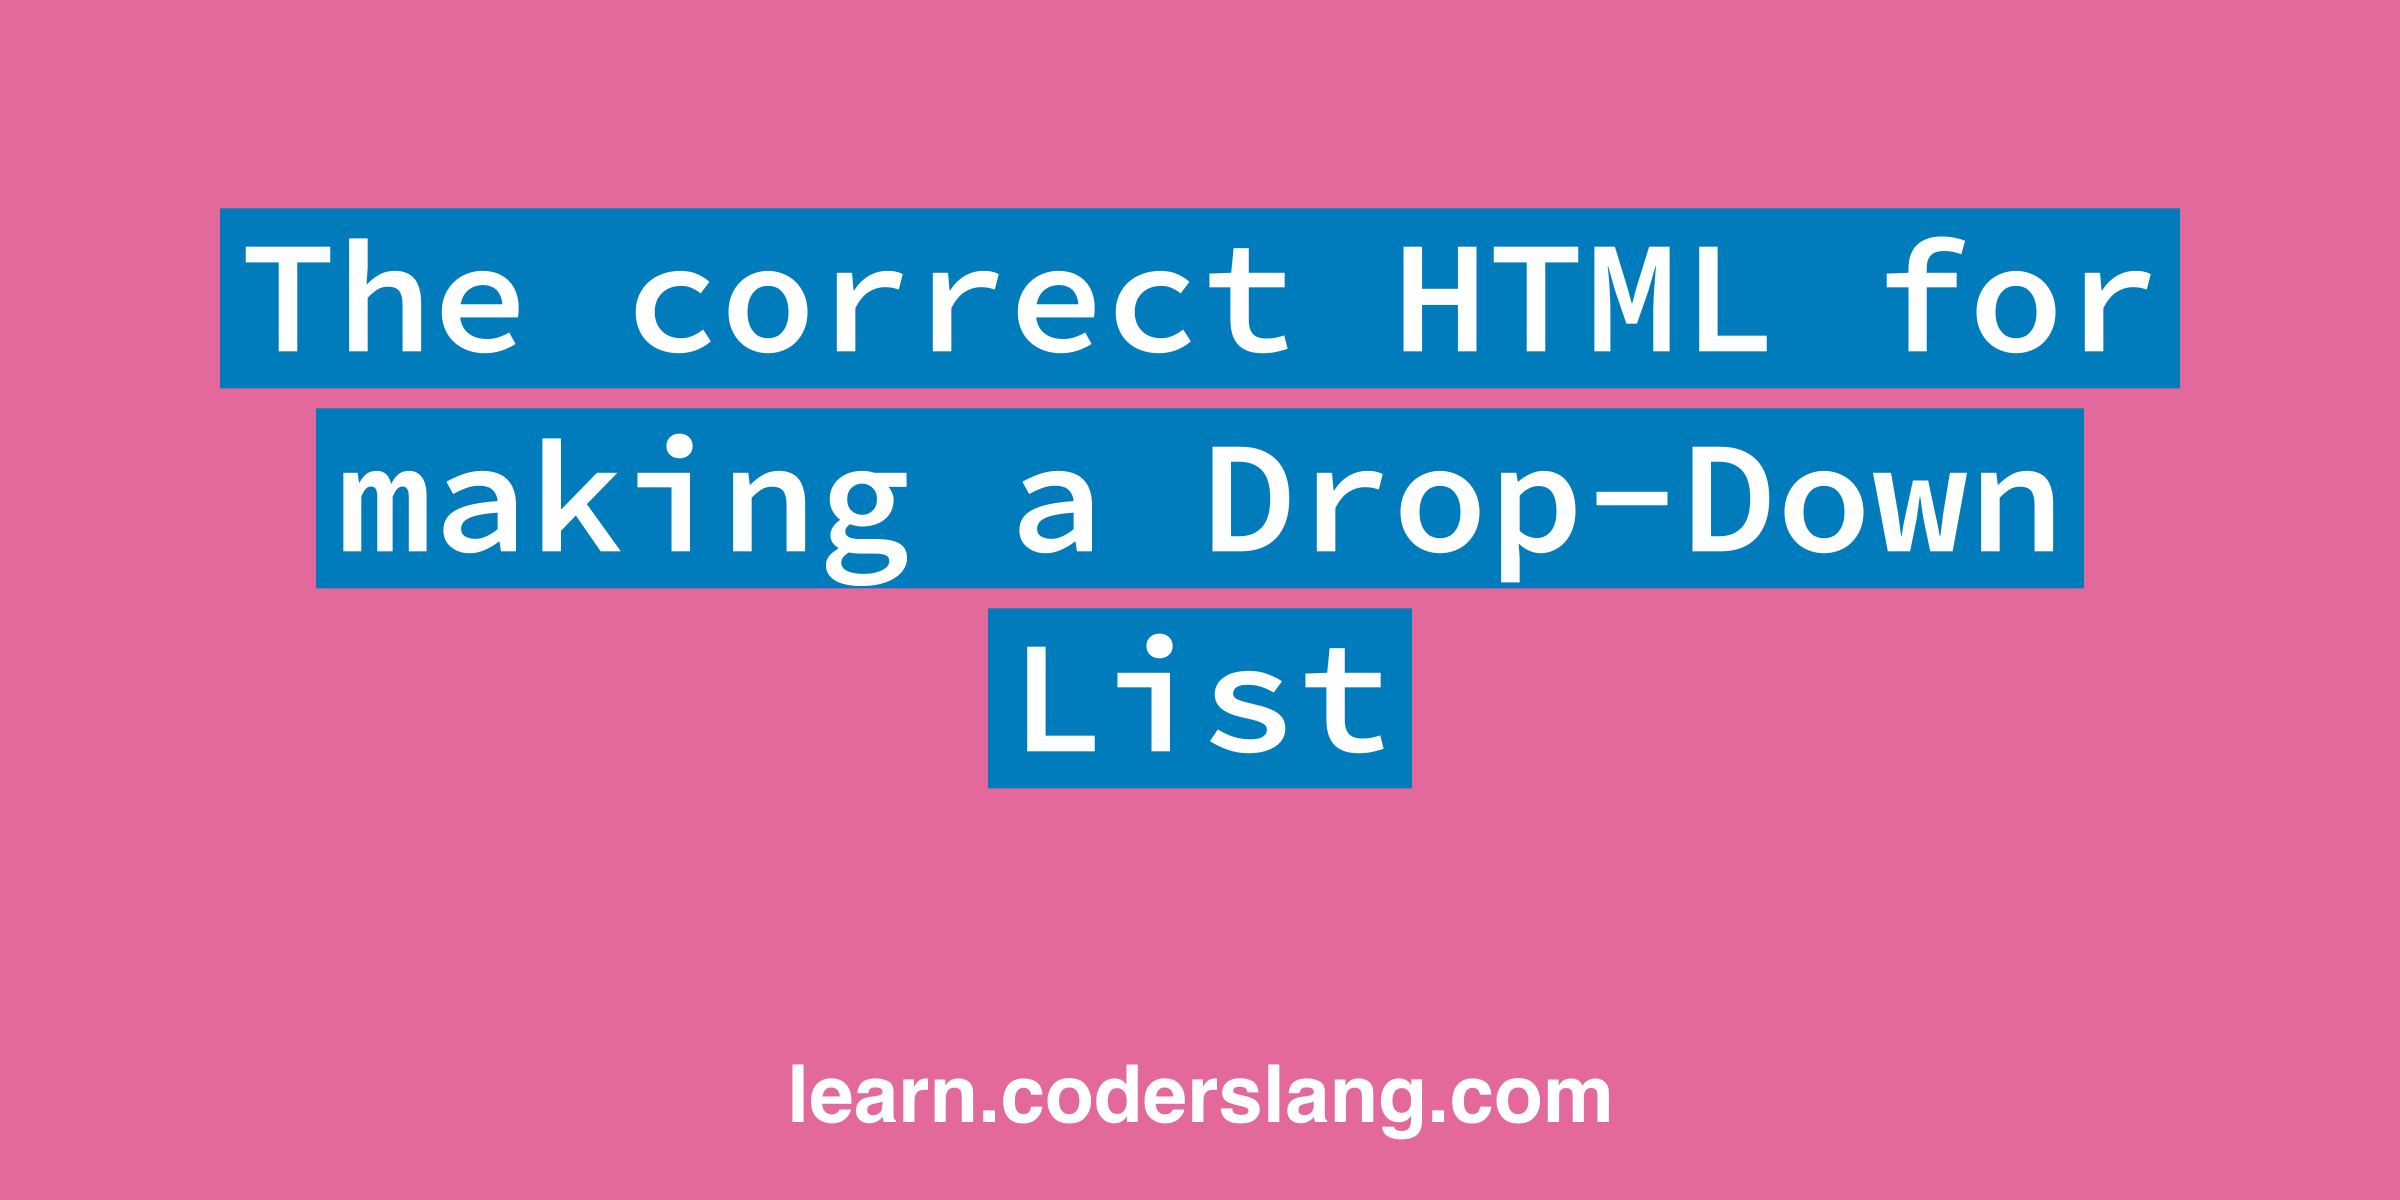 what-is-the-correct-html-for-making-a-drop-down-list